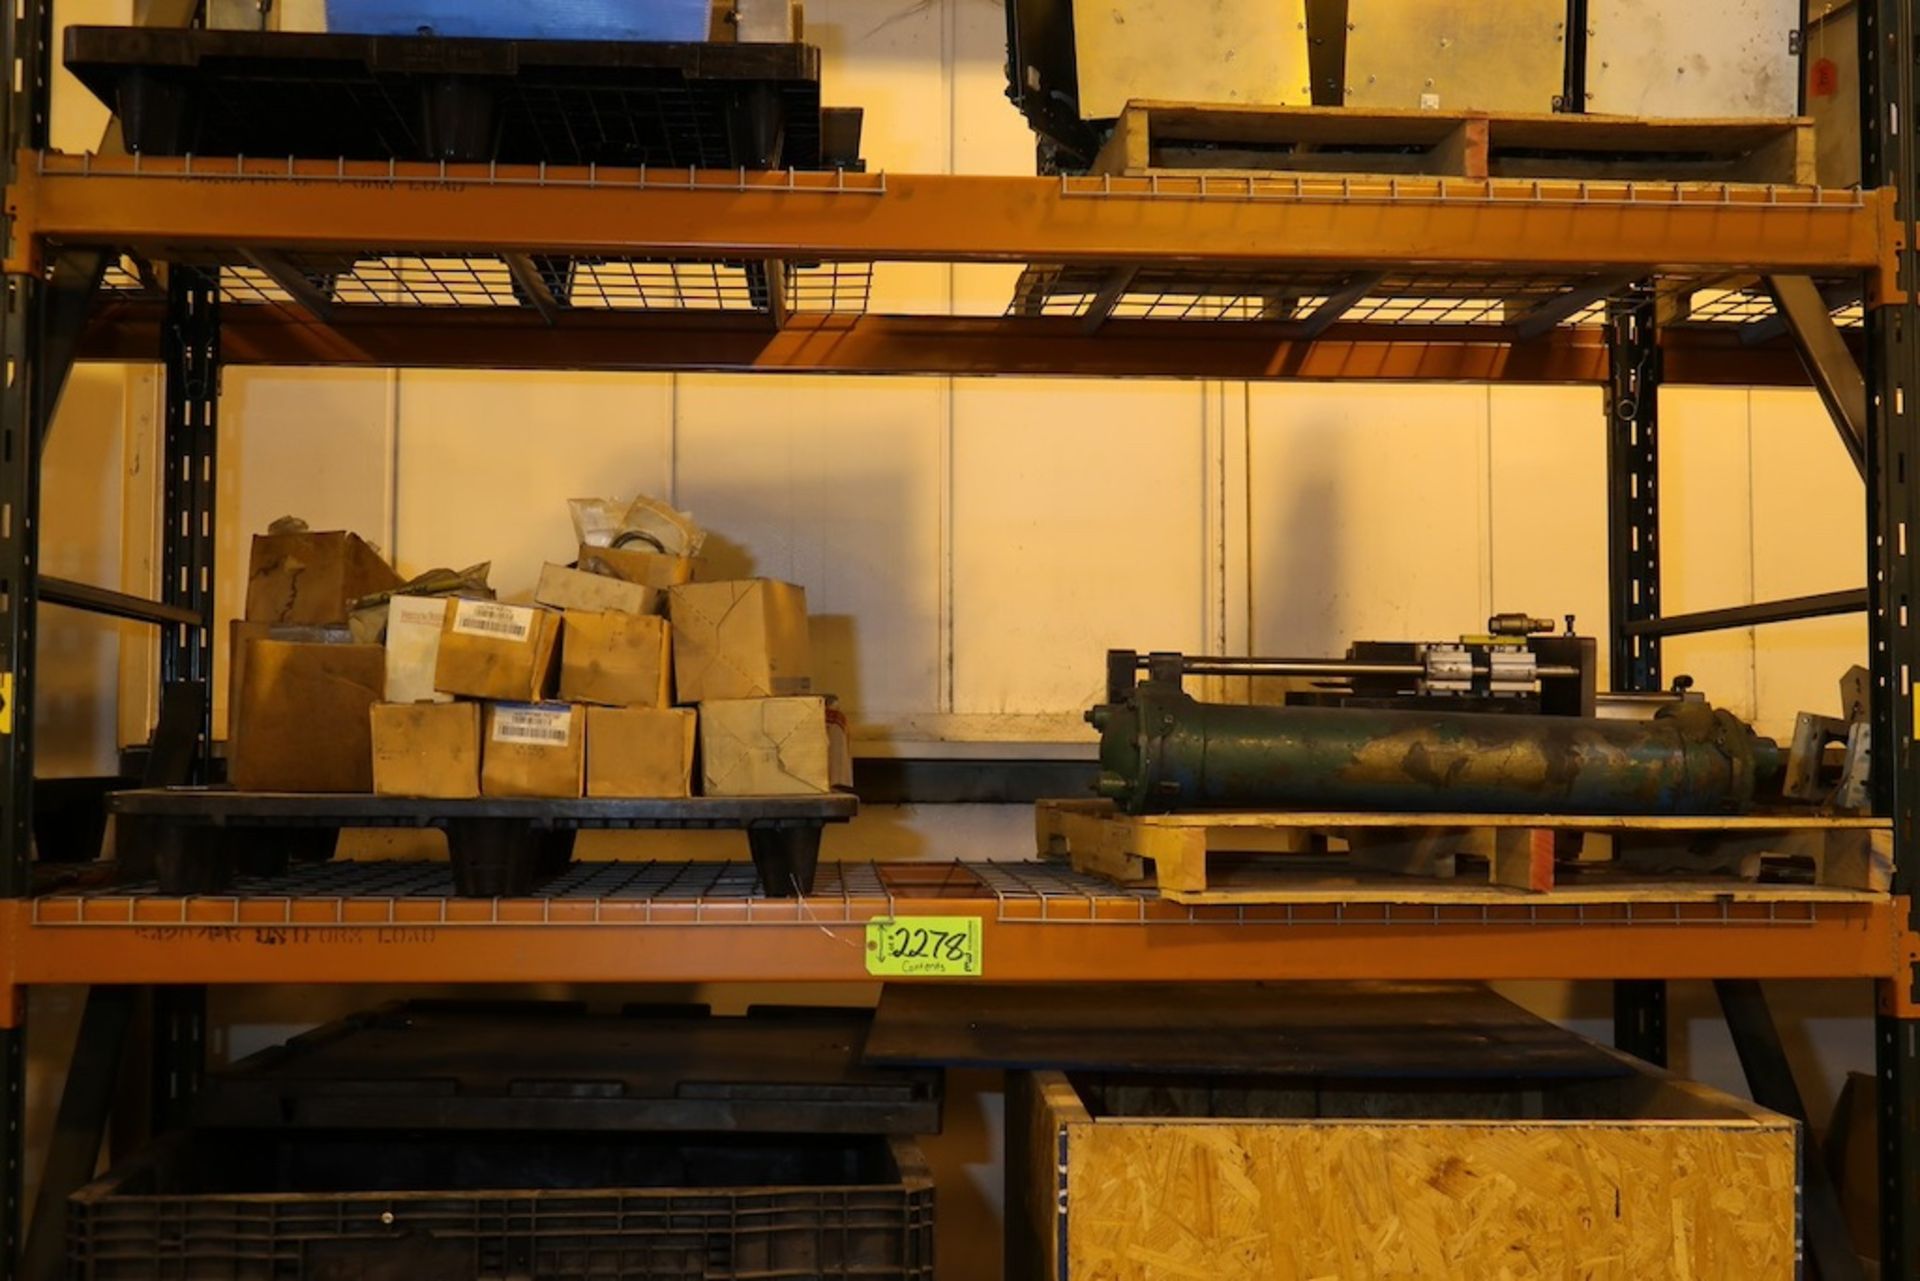 Contents of (1) Sections of Pallet Racking, Including Misc. Machine Parts, Etc. - Image 3 of 8